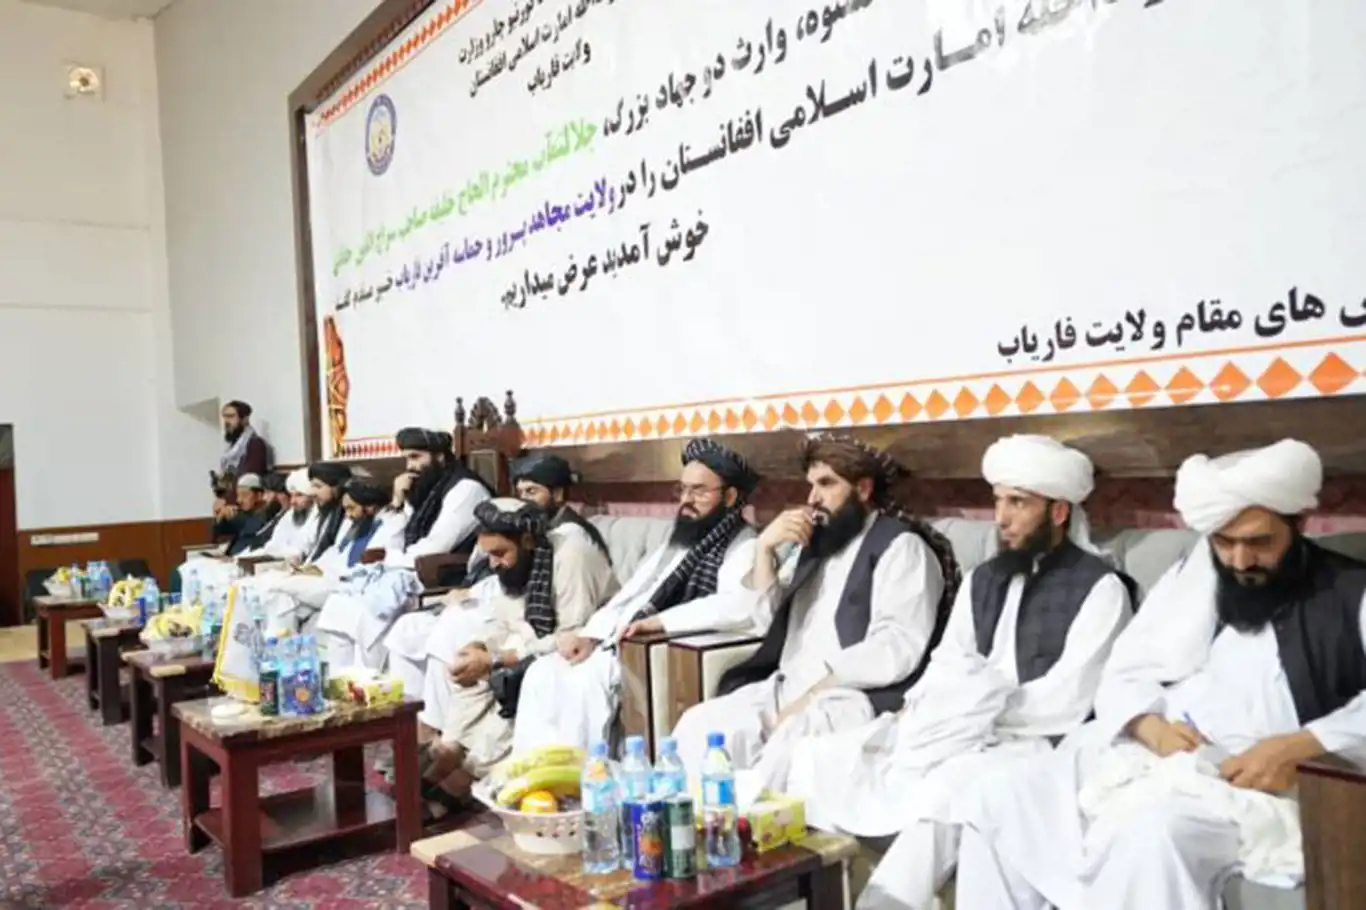 Interior Minister Haqqani: Afghans triumphed over invaders through faith and unity